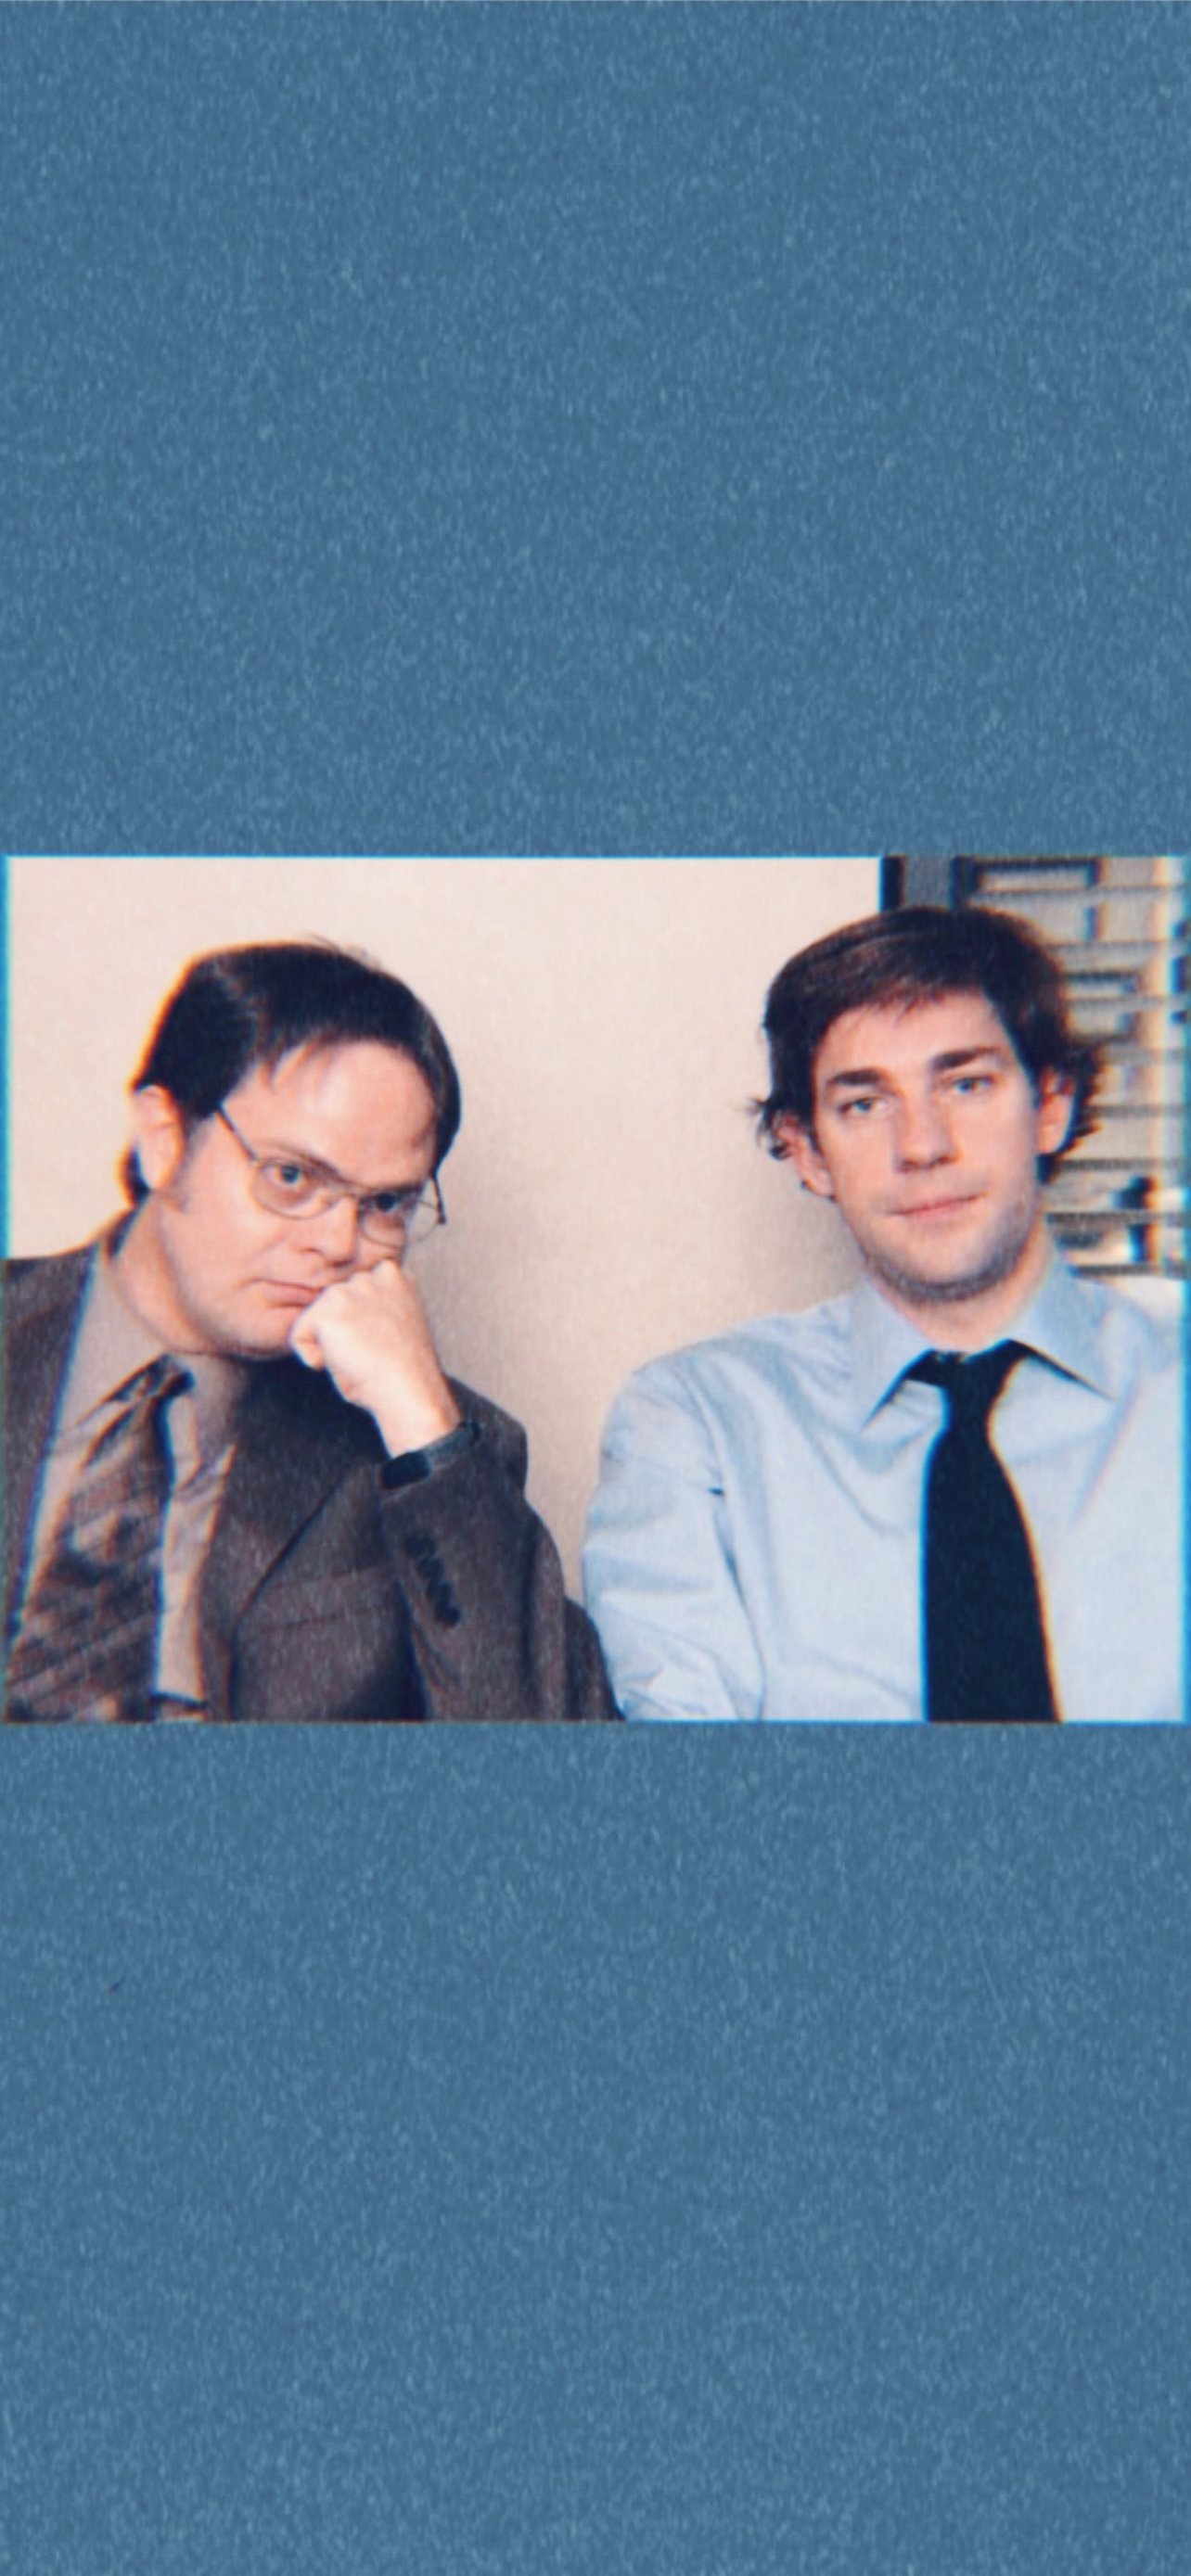 Dwight Schrute The Office Cave iPhone wallpaper 